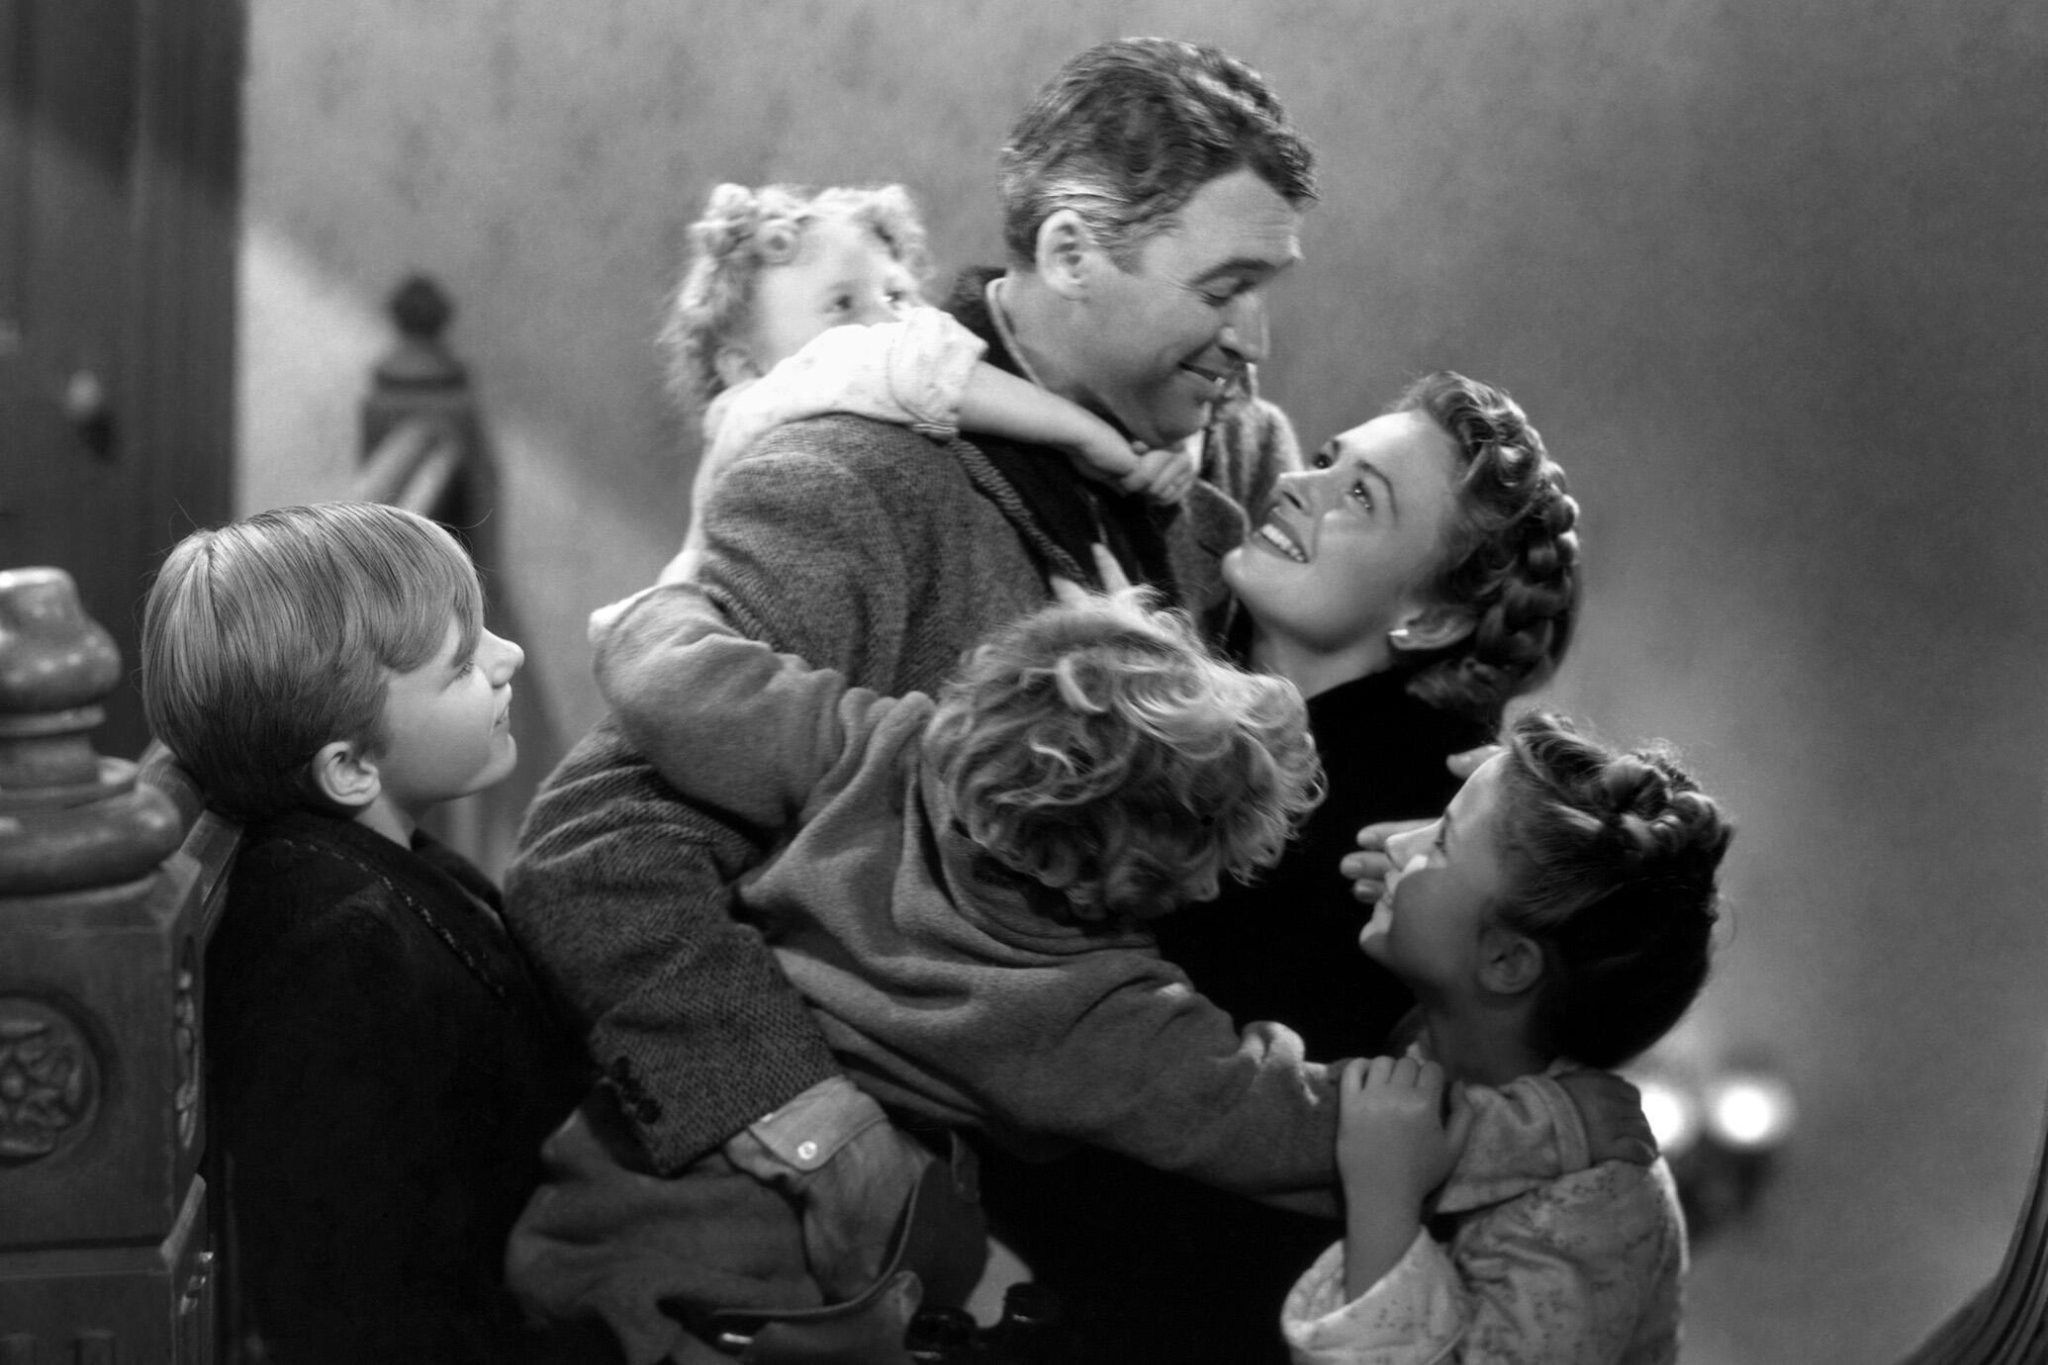 How to Watch It's a Wonderful Life in 2020